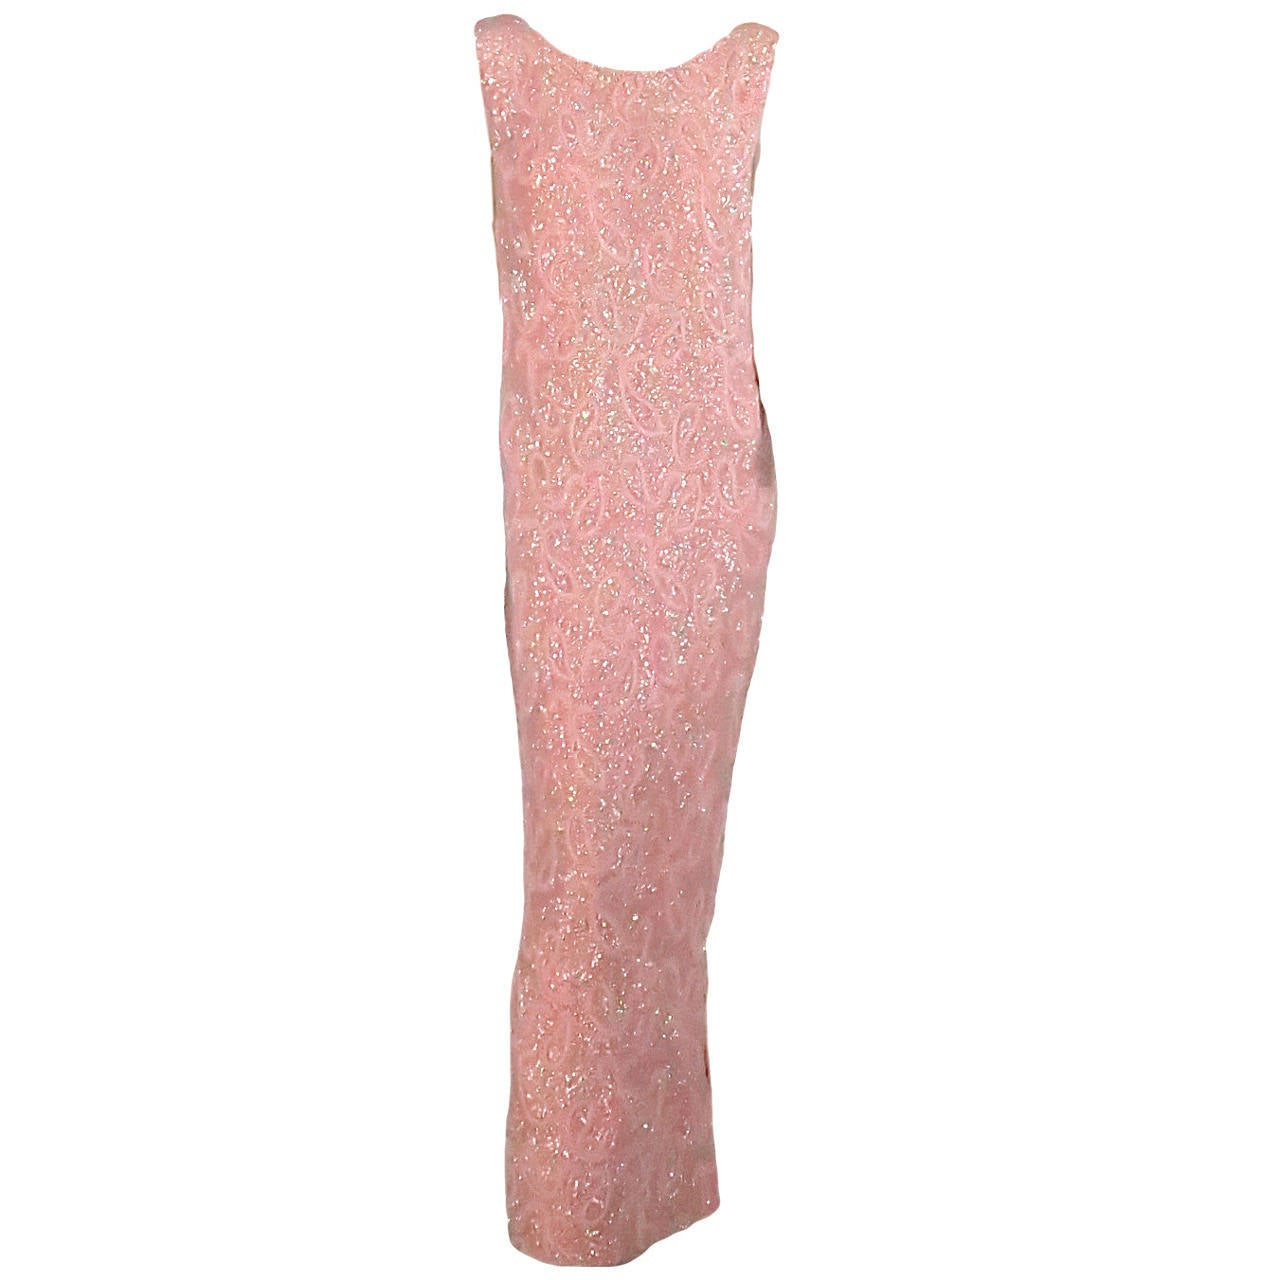 Early 1960s pink beaded sweater knit evening gown Hong Kong